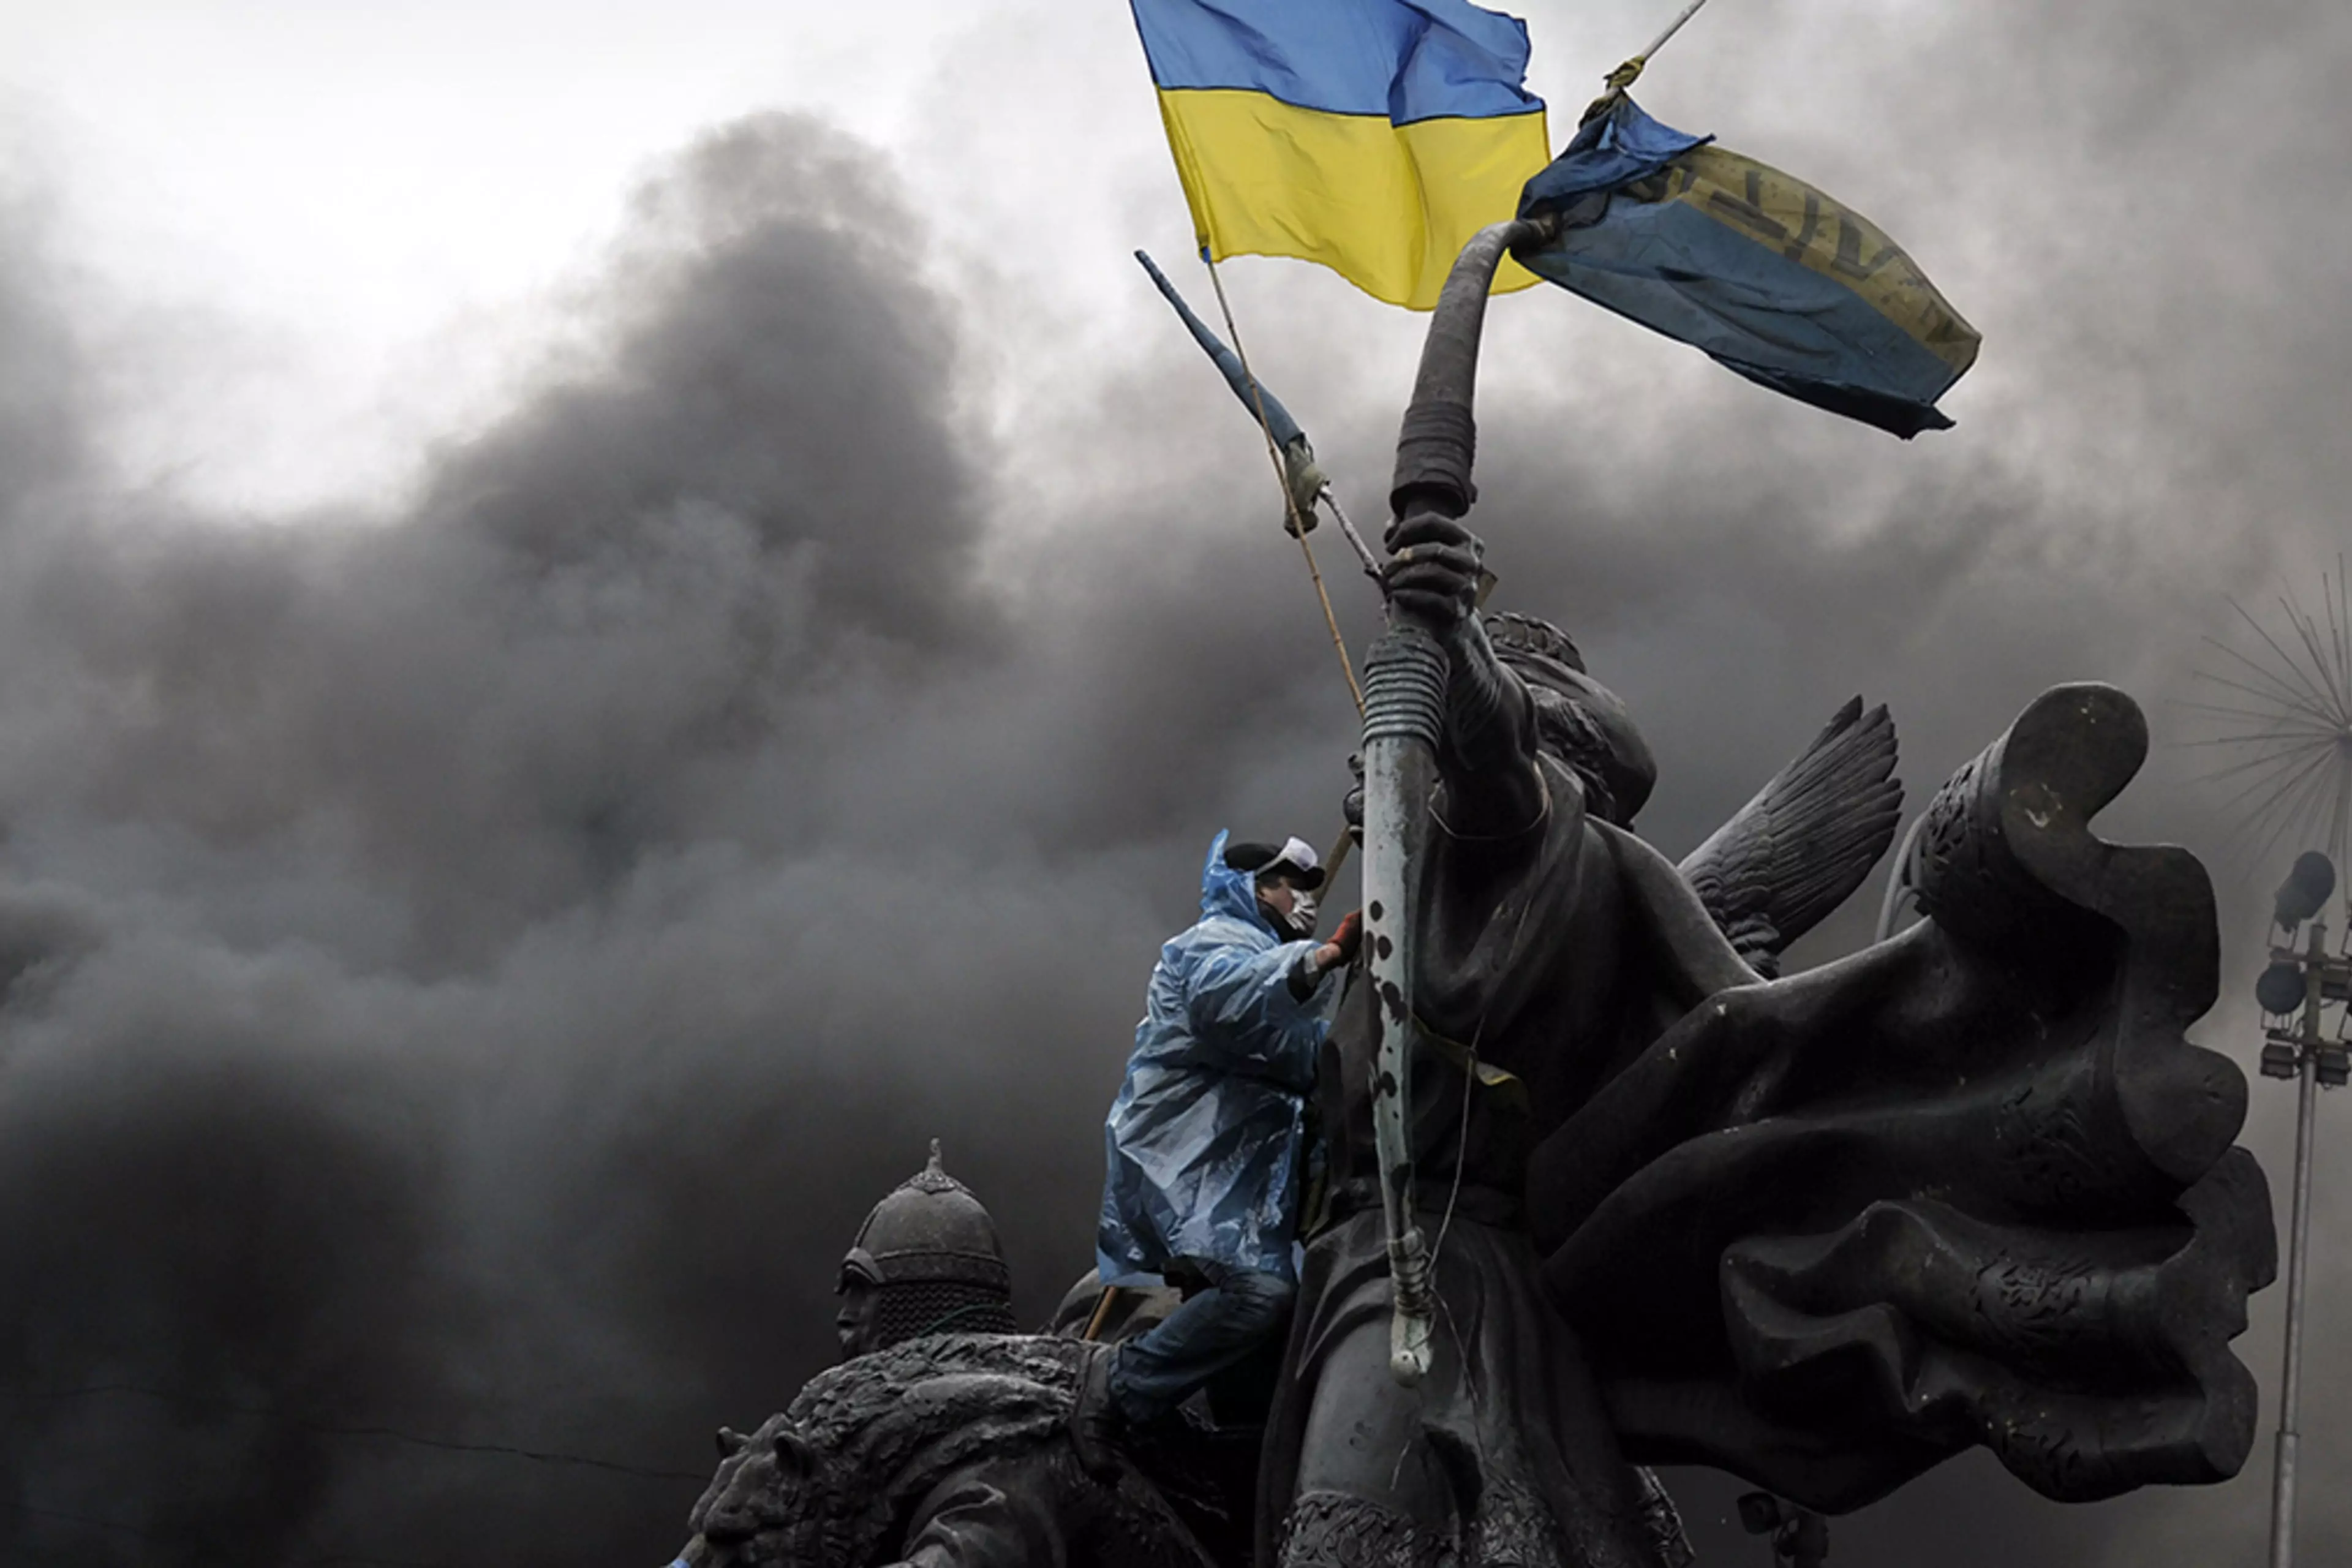 A protester sits on a monument in Kyiv during clashes with riot police in February 2014.